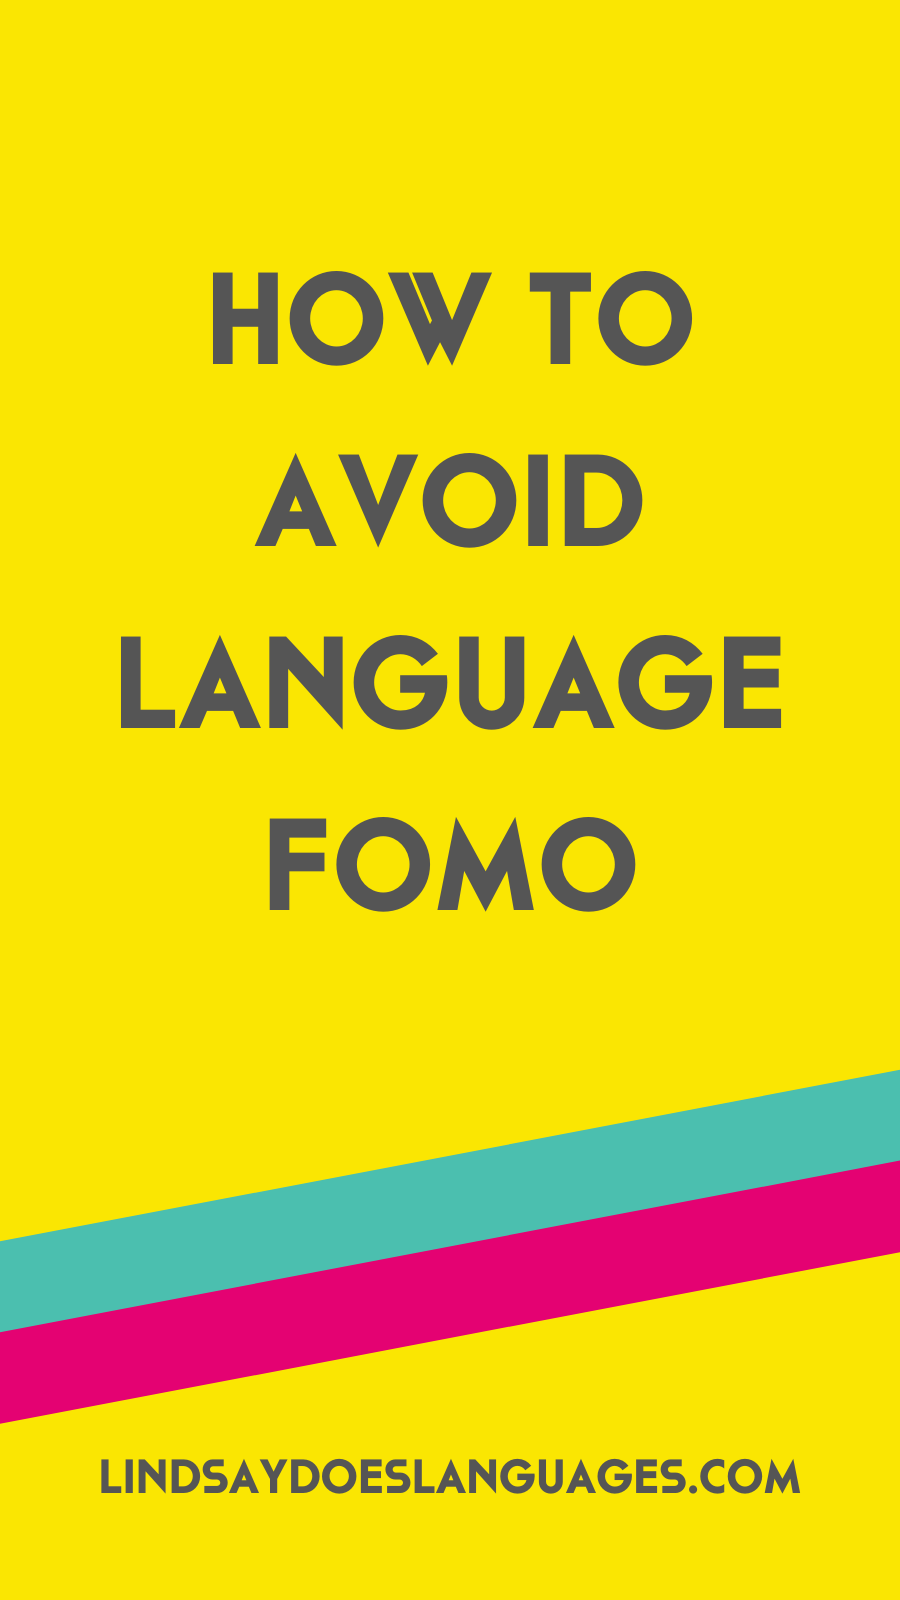 Sometimes when we're learning languages, we feel the language FOMO: The Fear Of Missing Out. Here's how to make sure that doesn't happen.